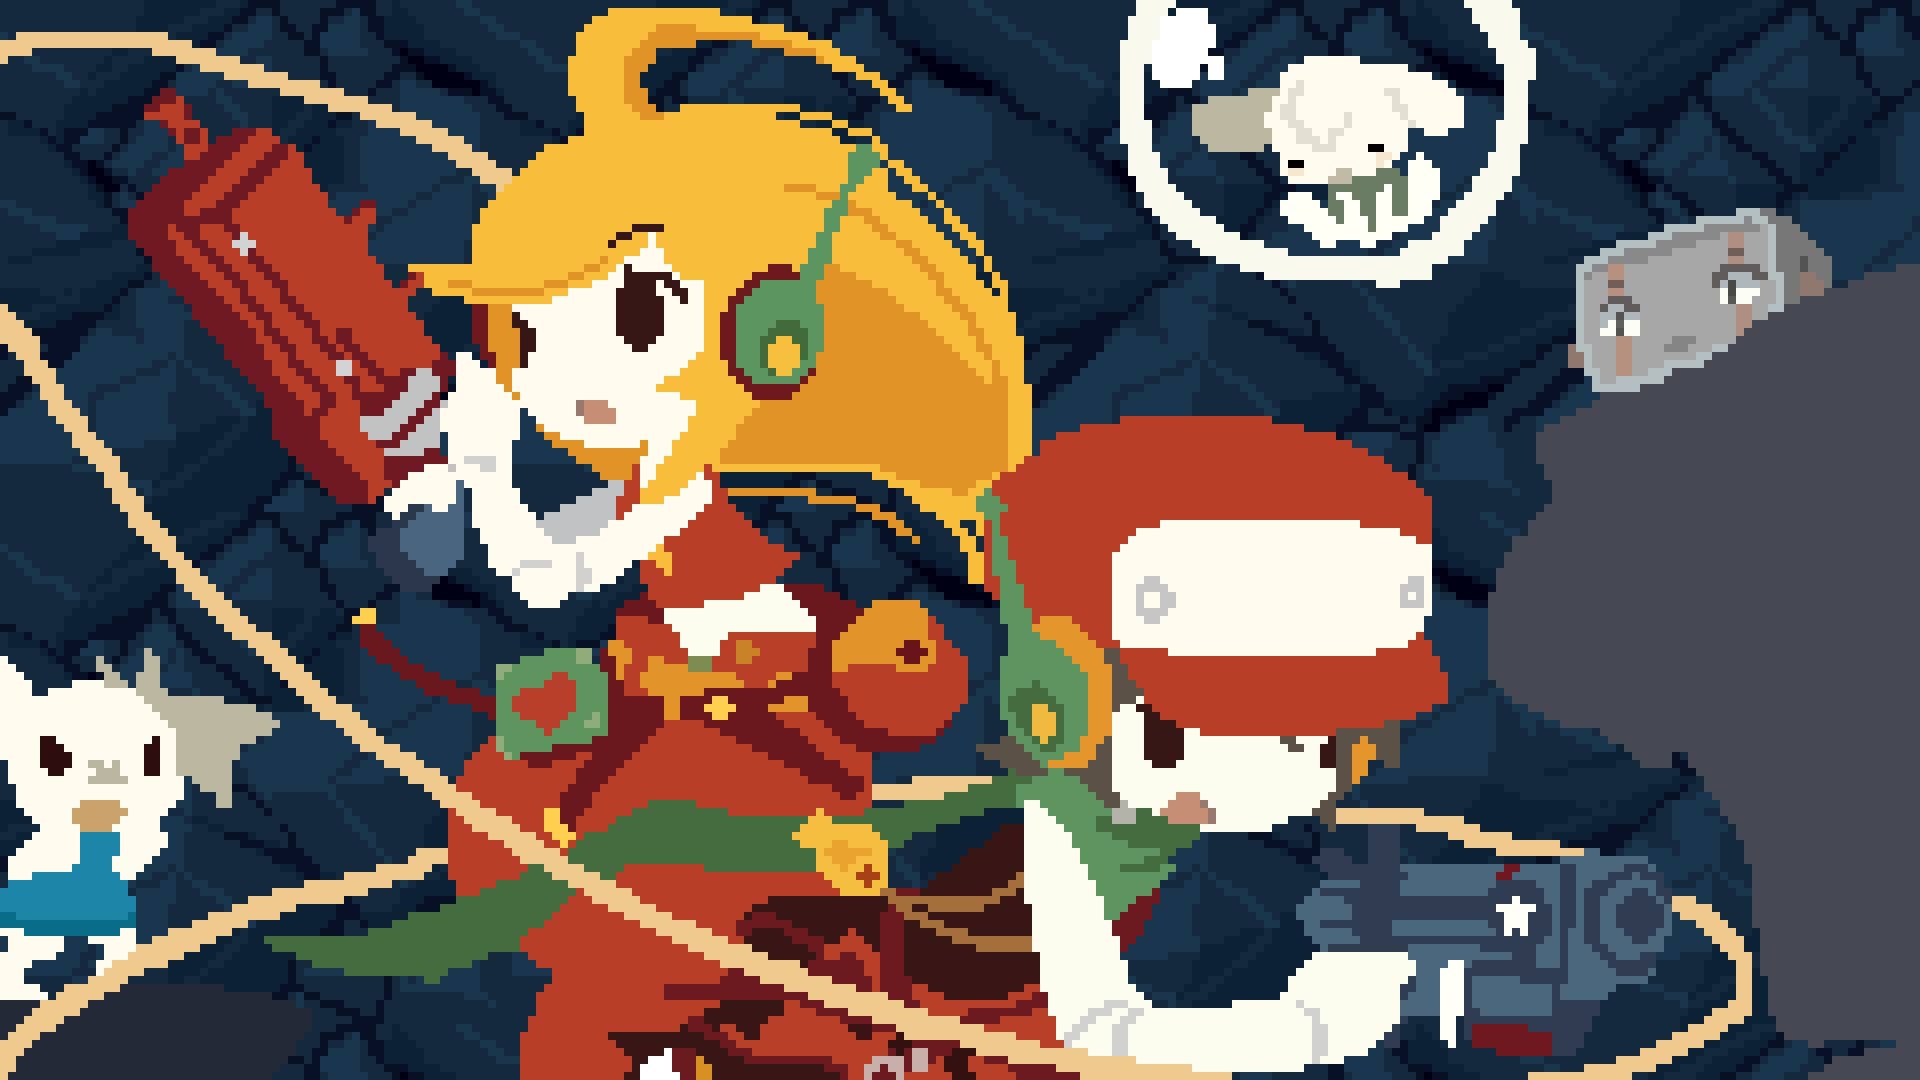 Epic Store, Cave Story+ in regalo